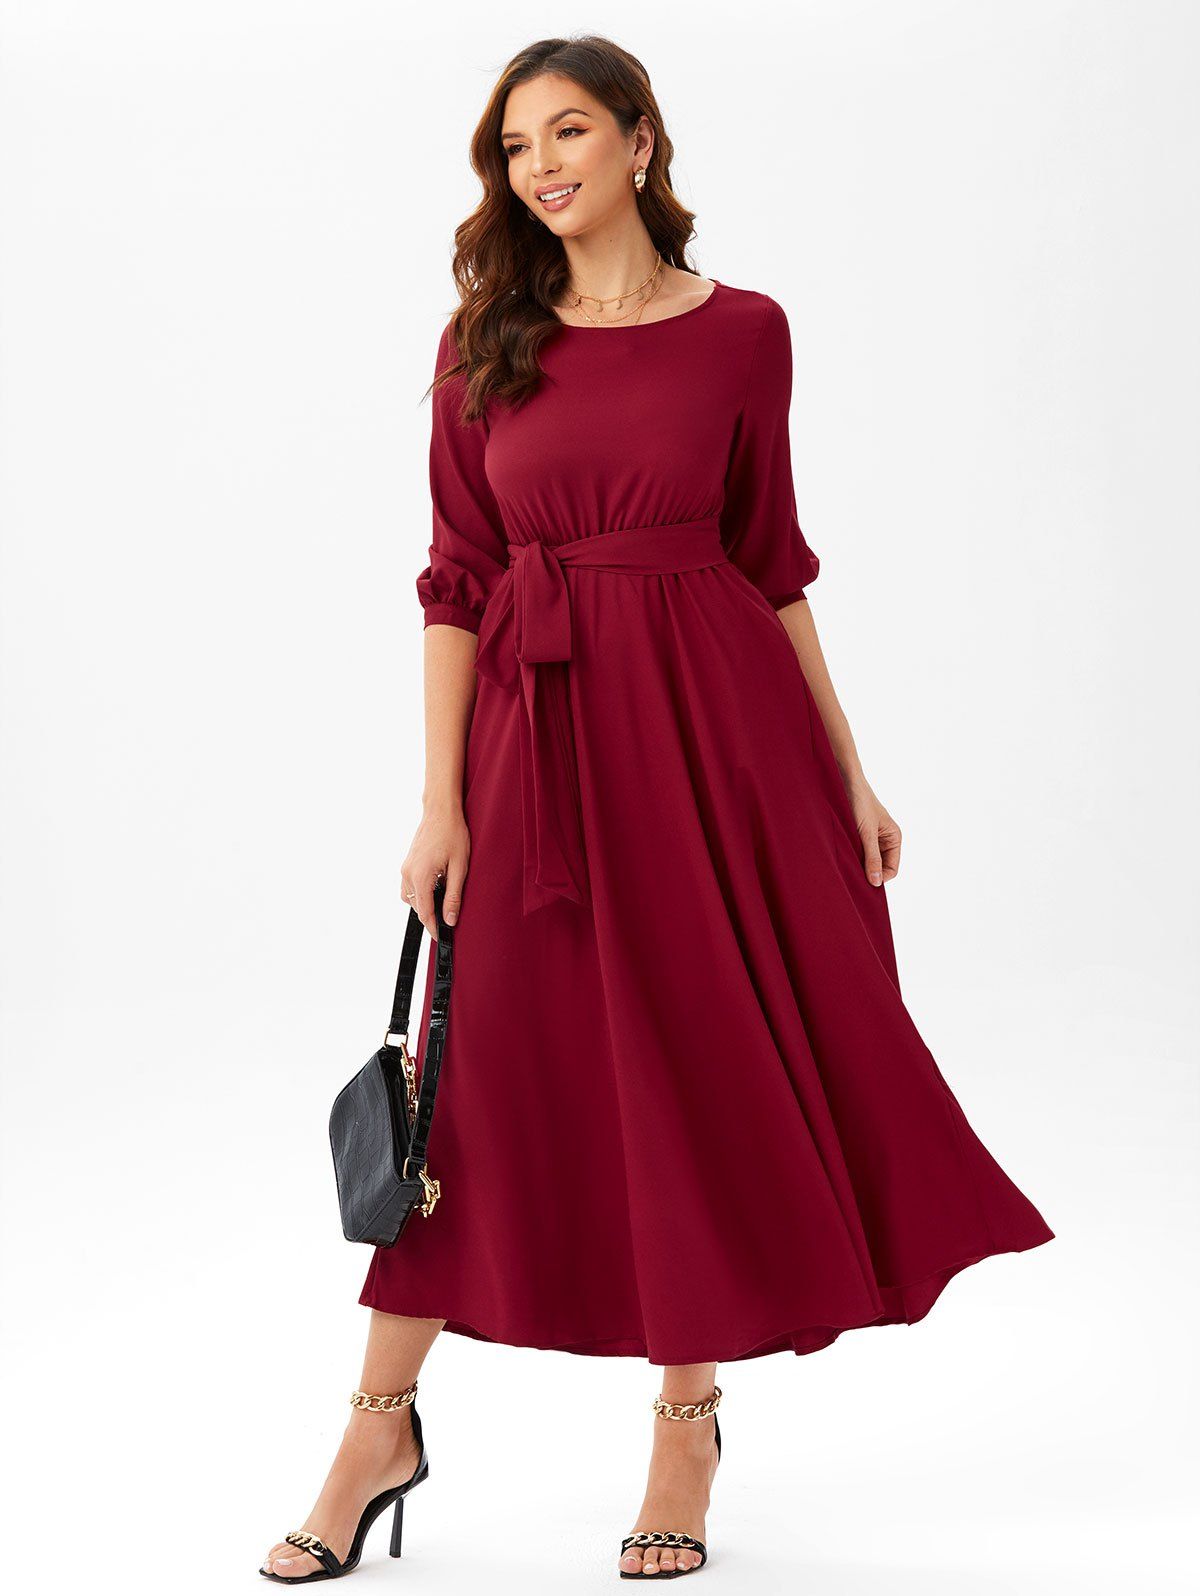 Belted Lantern Sleeve Maxi Prom Dress - DEEP RED M